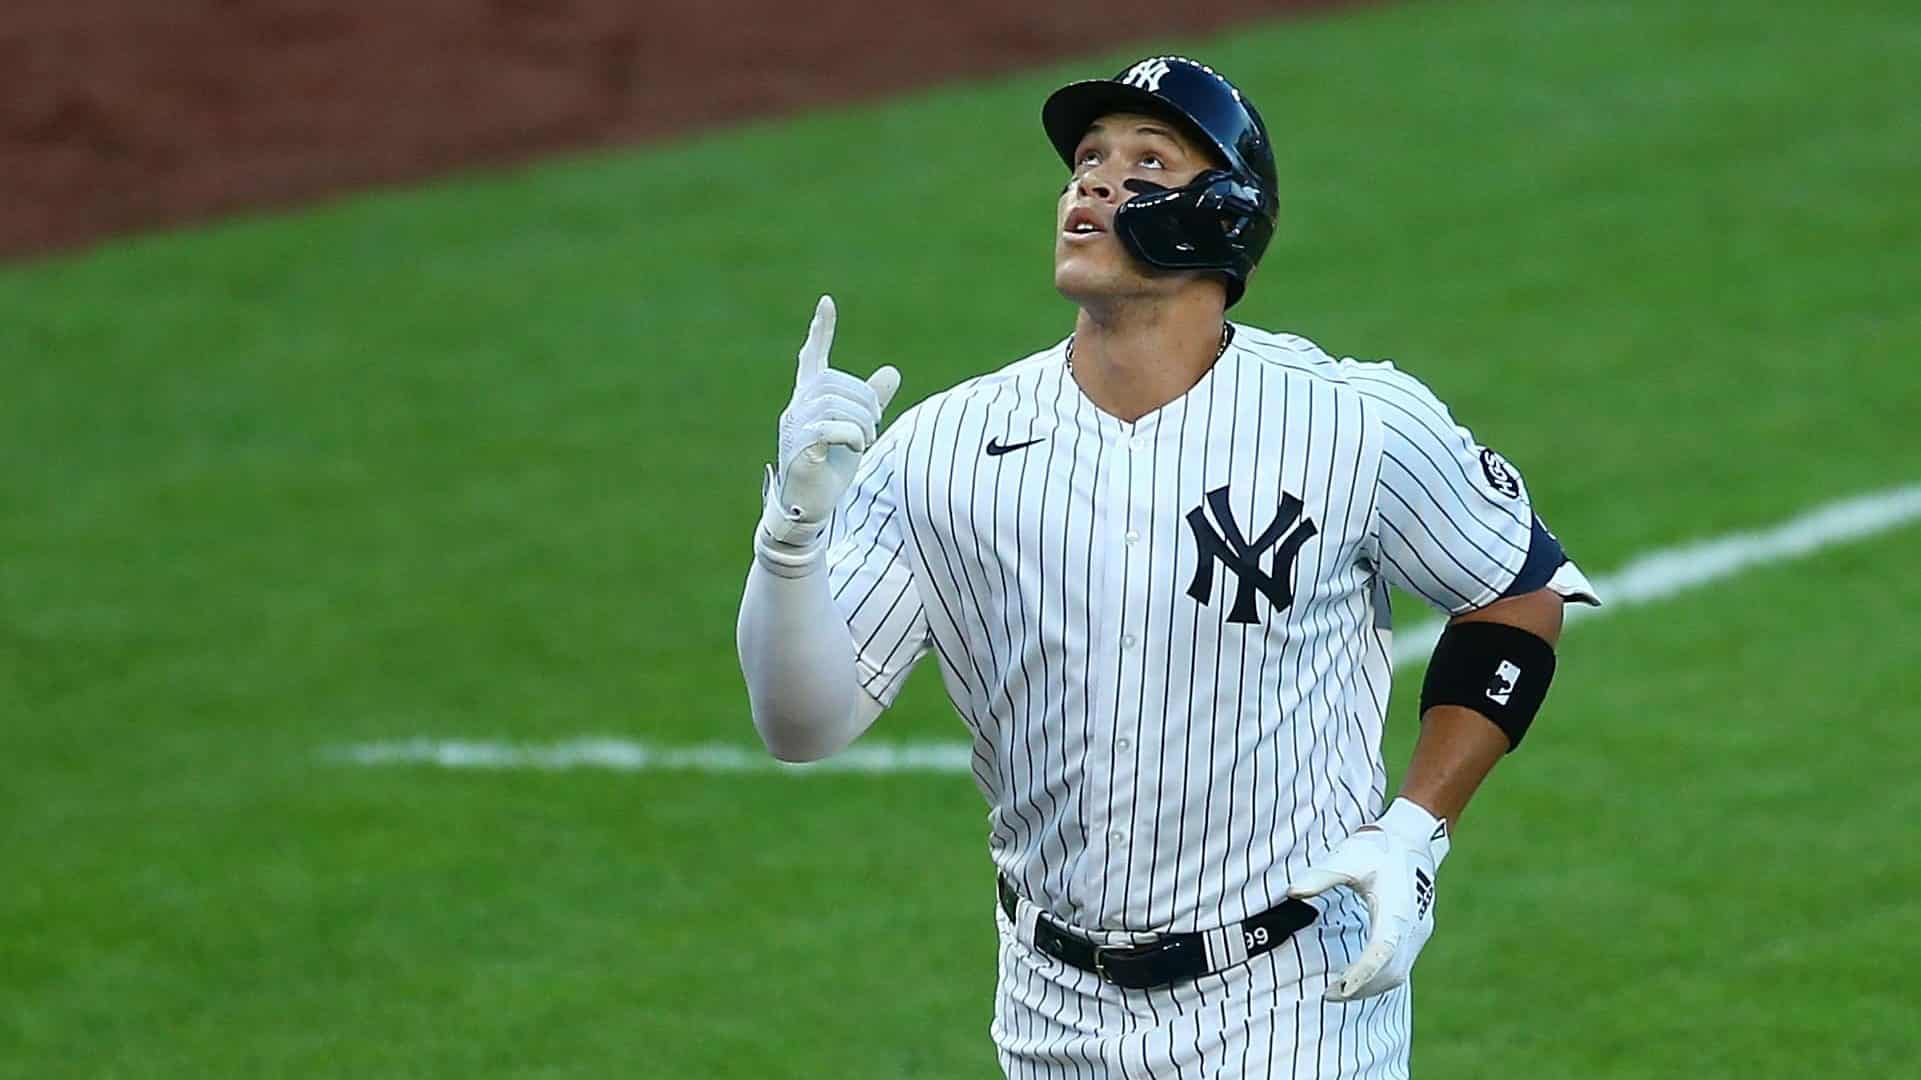 NEW YORK, NEW YORK - AUGUST 01: Aaron Judge #99 of the New York Yankees points to the sky after hitting a first inning home run against the Boston Red Sox at Yankee Stadium on August 01, 2020 in New York City.